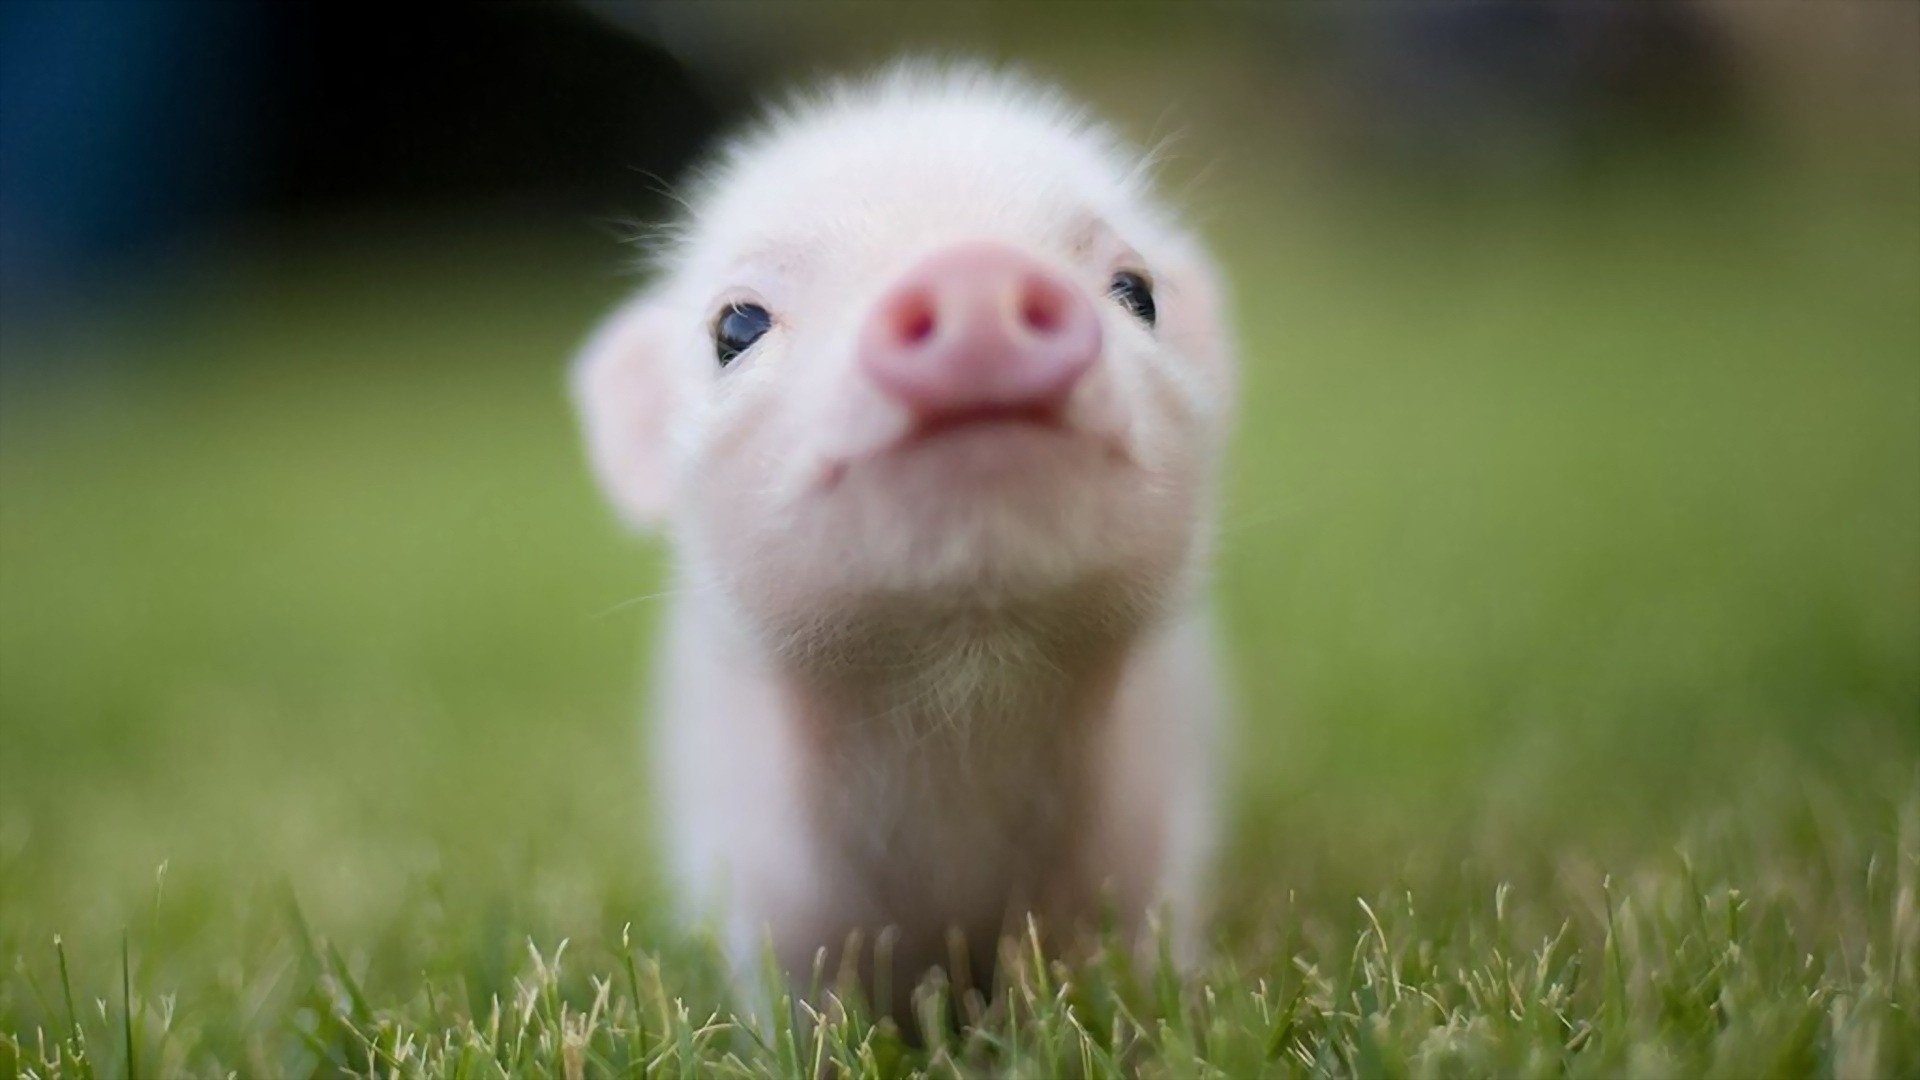 Pig wallpapers, Playful and delightful, Curly-tailed cuteness, Farm animal fun, 1920x1080 Full HD Desktop